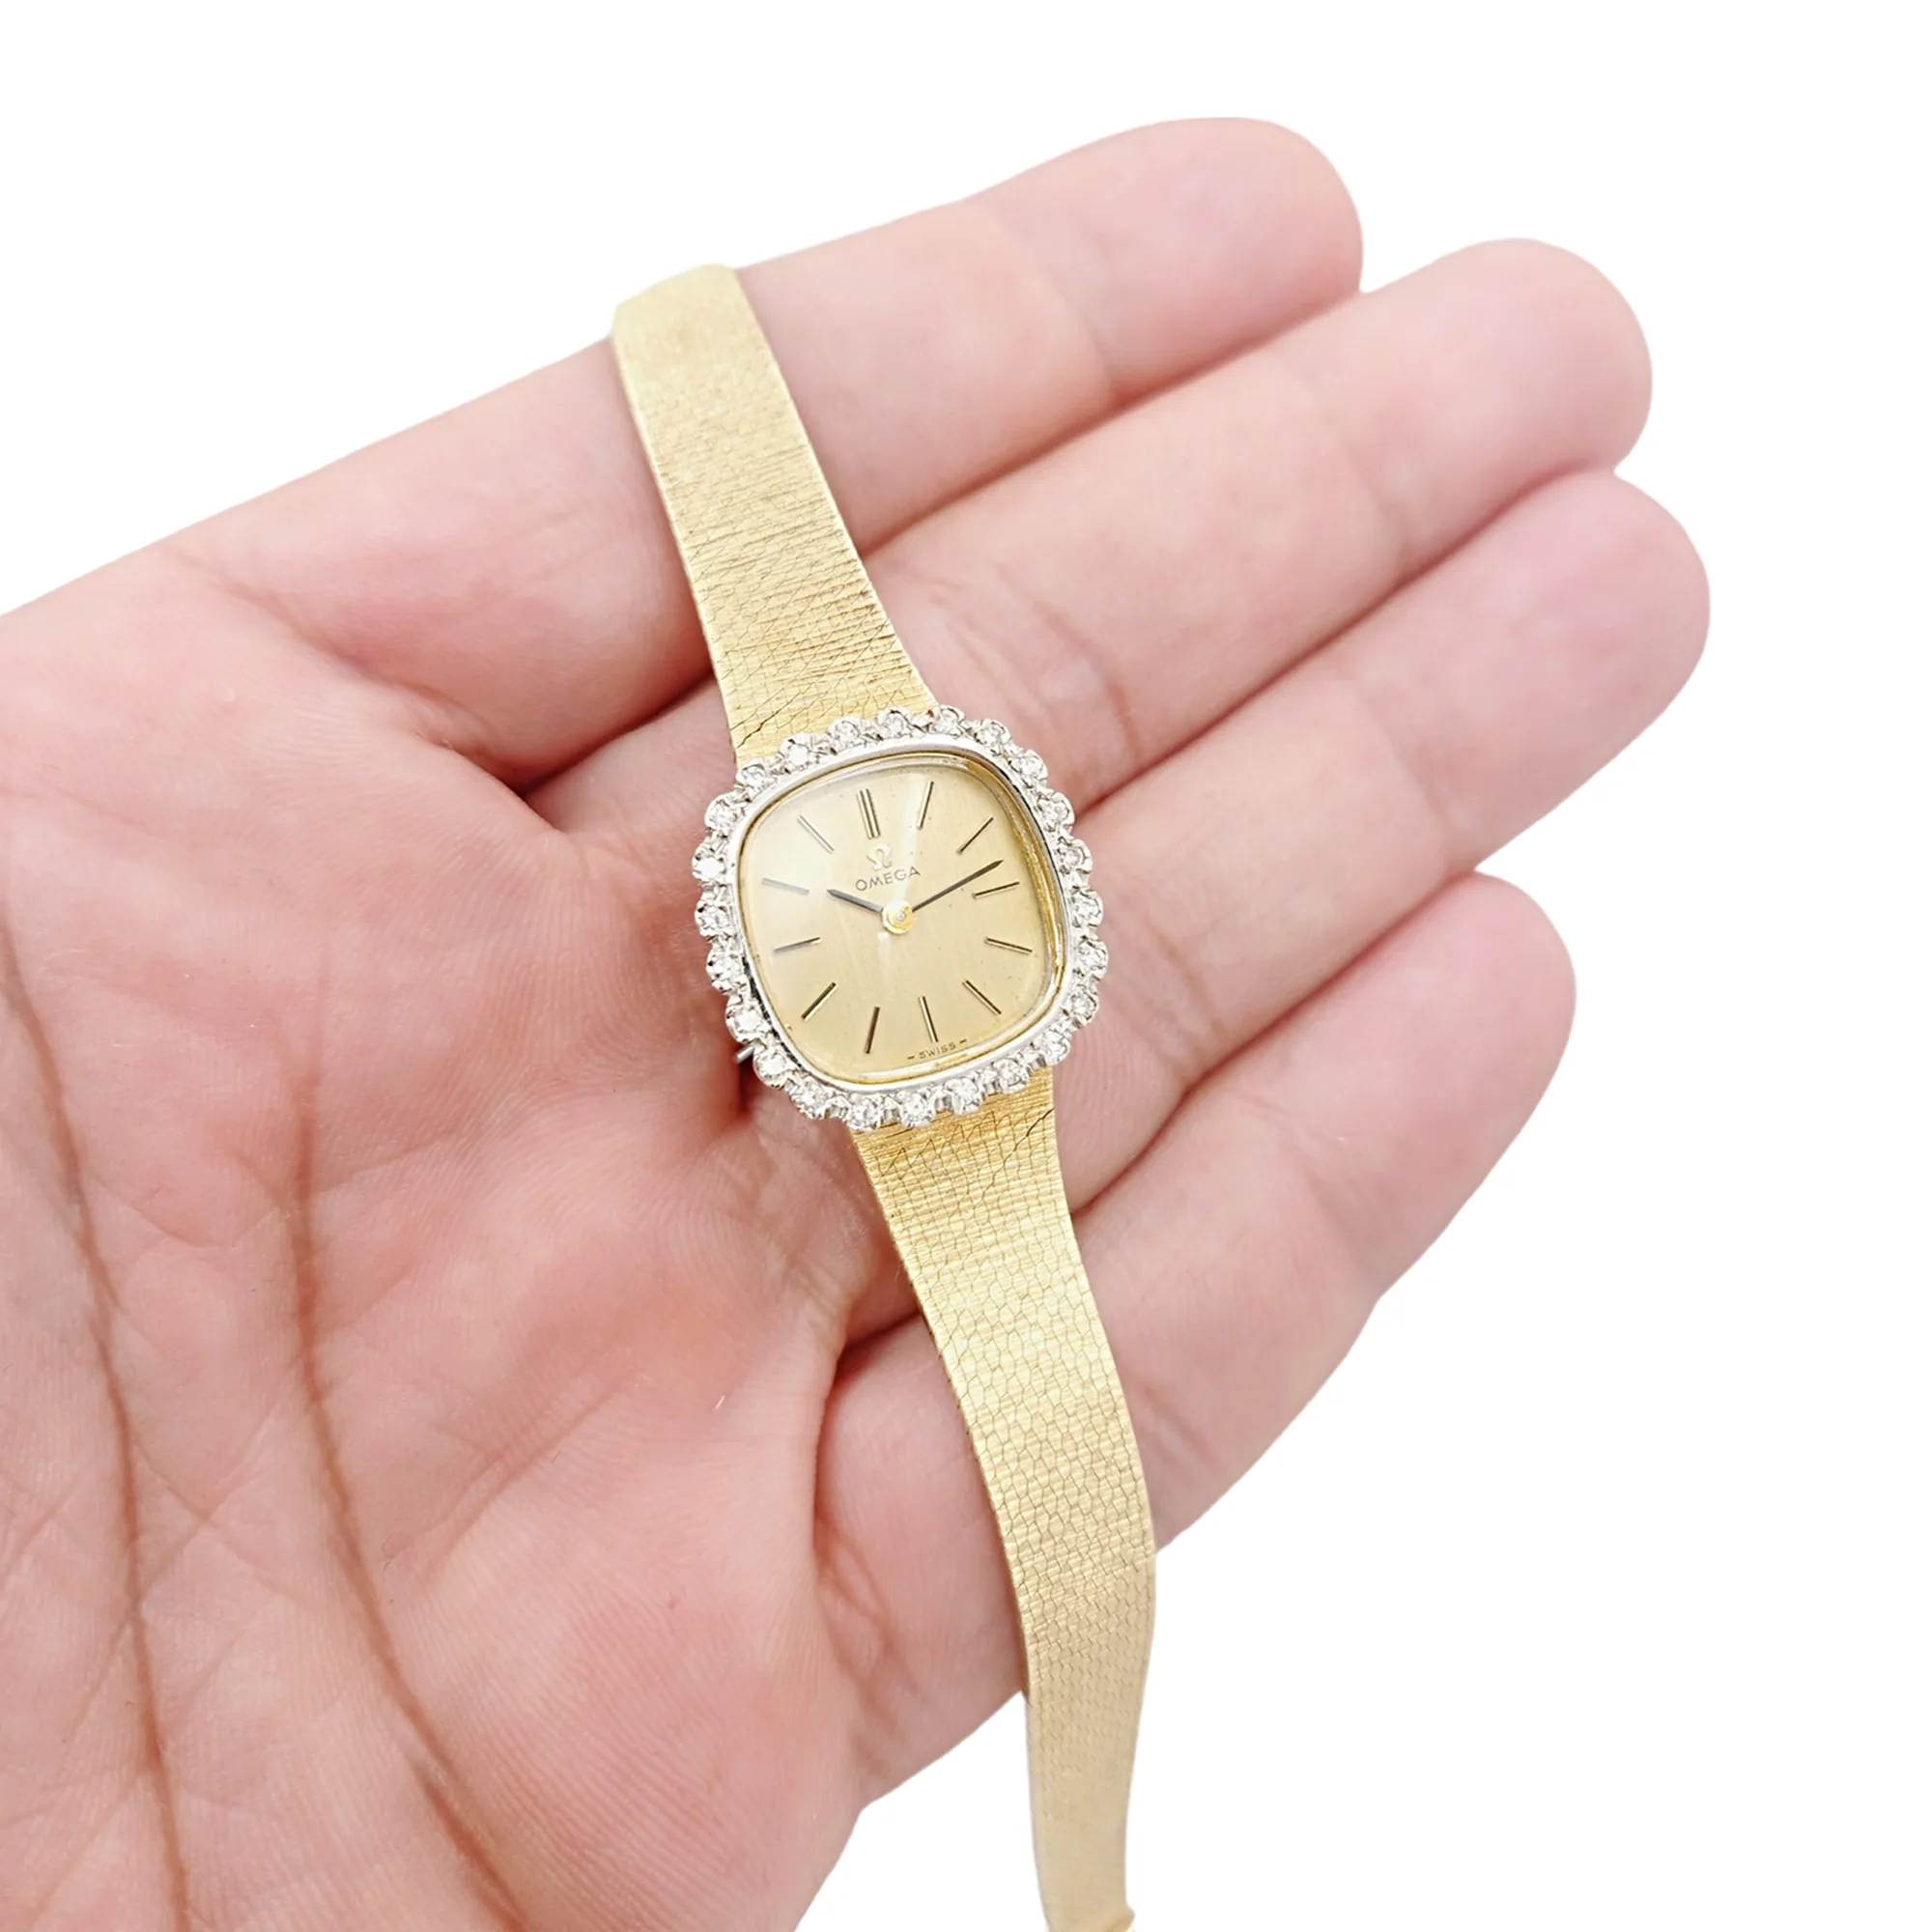 Ladies Omega 20mm Vintage 14K Yellow Gold Automatic Watch with Gold Dial and Diamond Bezel. (Pre-Owned)